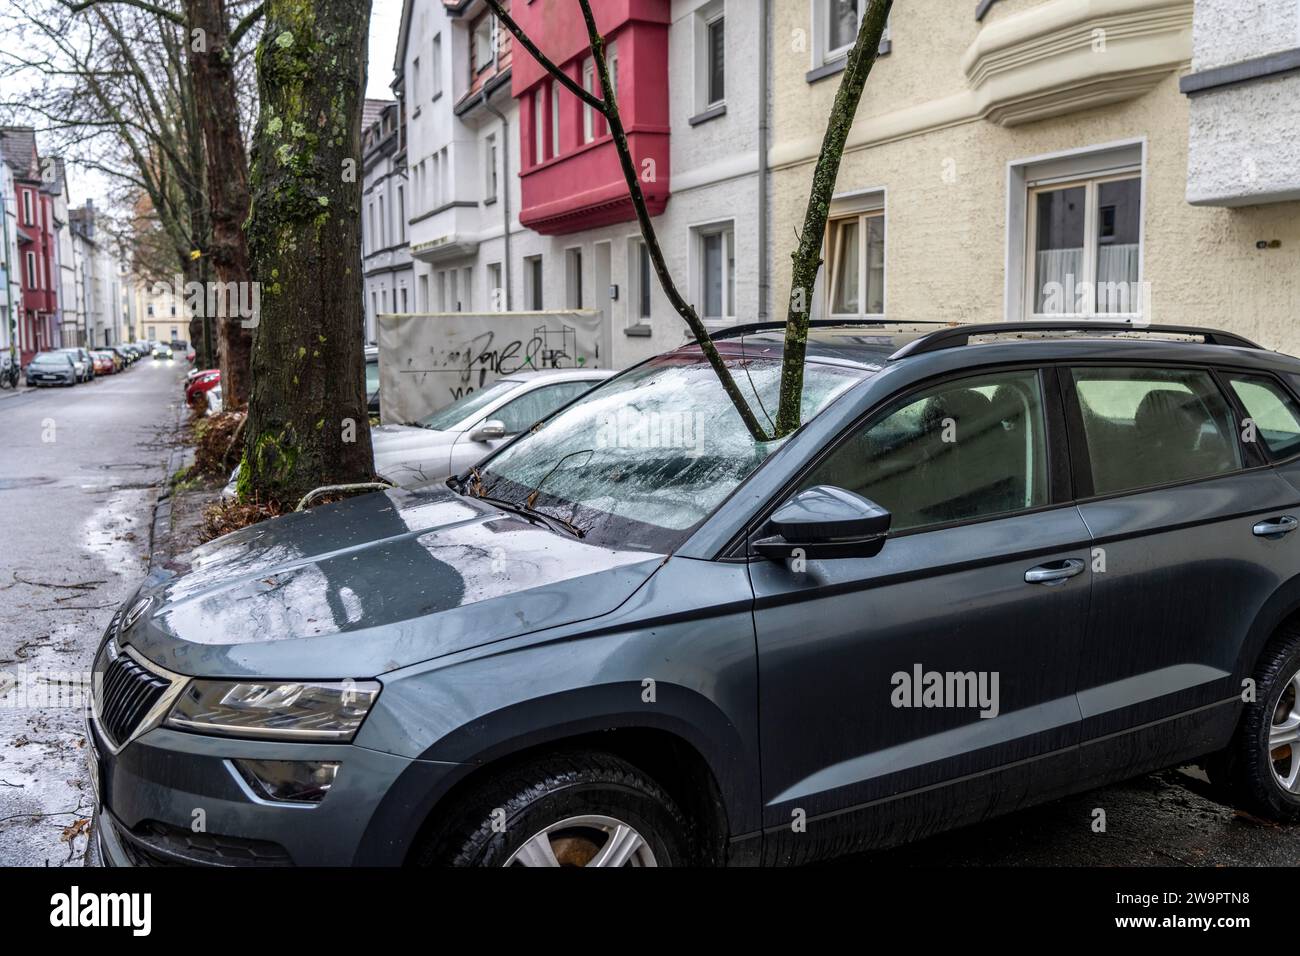 NRW, Germany, storm damage, a 4 metre long branch was broken off by the storm during storm Zoltan and smashed through the windscreen of a parked vehic Stock Photo